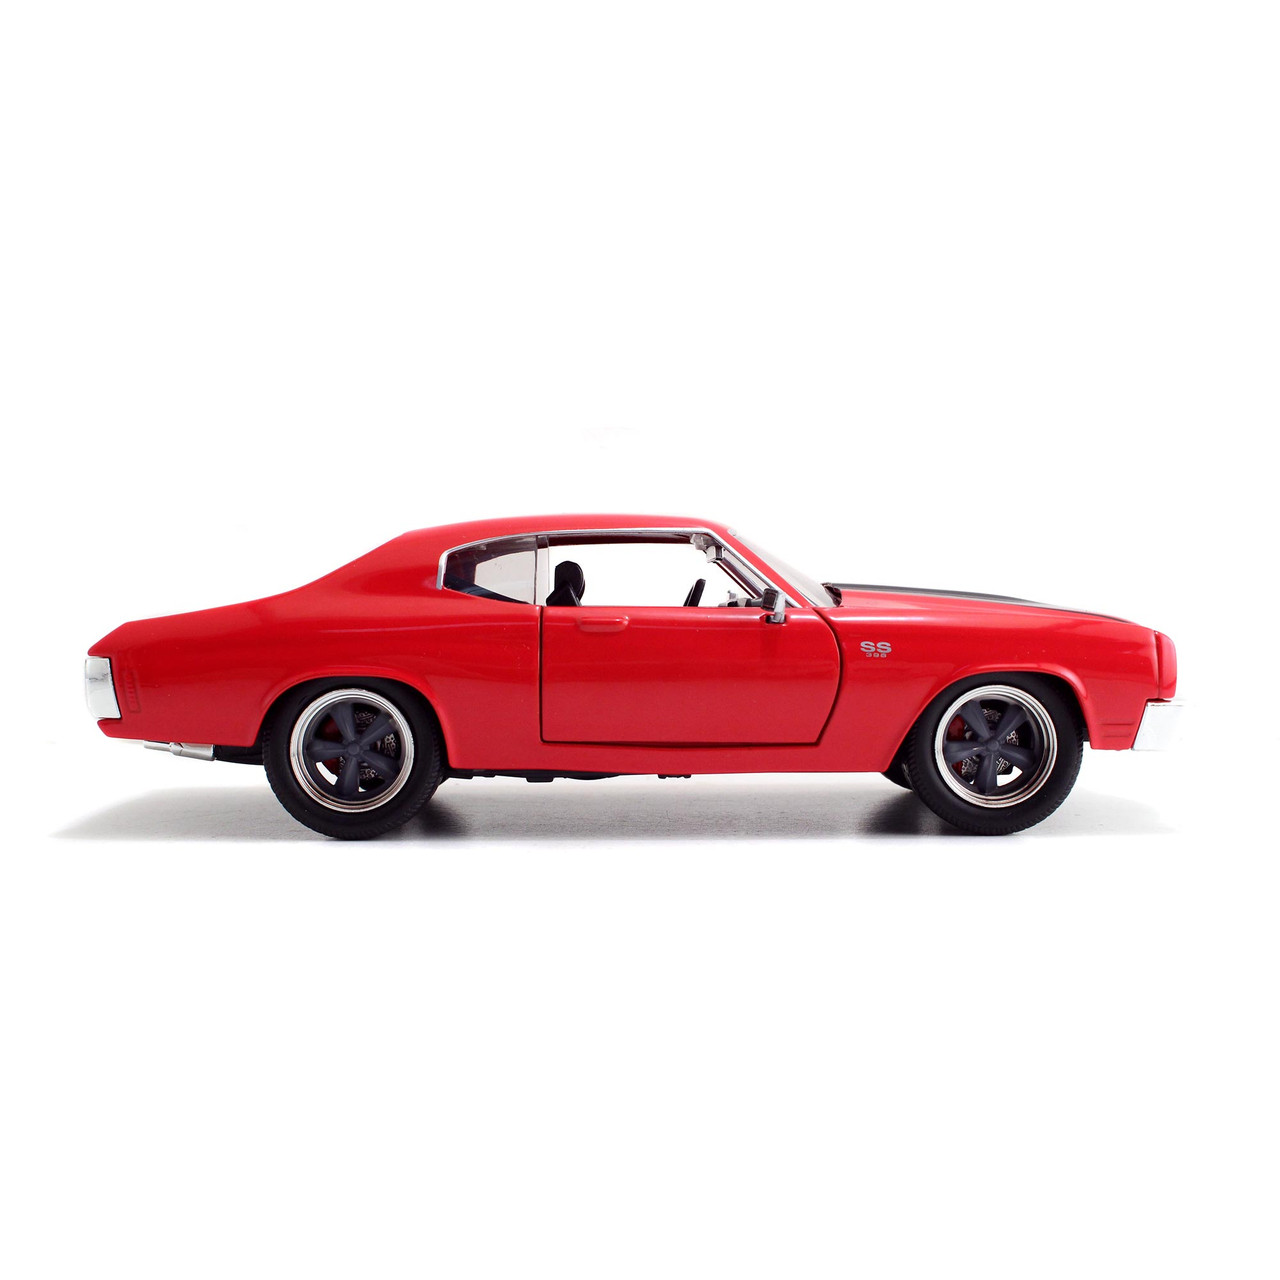 DOM's Chevy Chevelle SS - Glossy Red - Fast u0026 Furious 1:24 Scale Diecast  Model by Jada Toys | Collectable Diecast